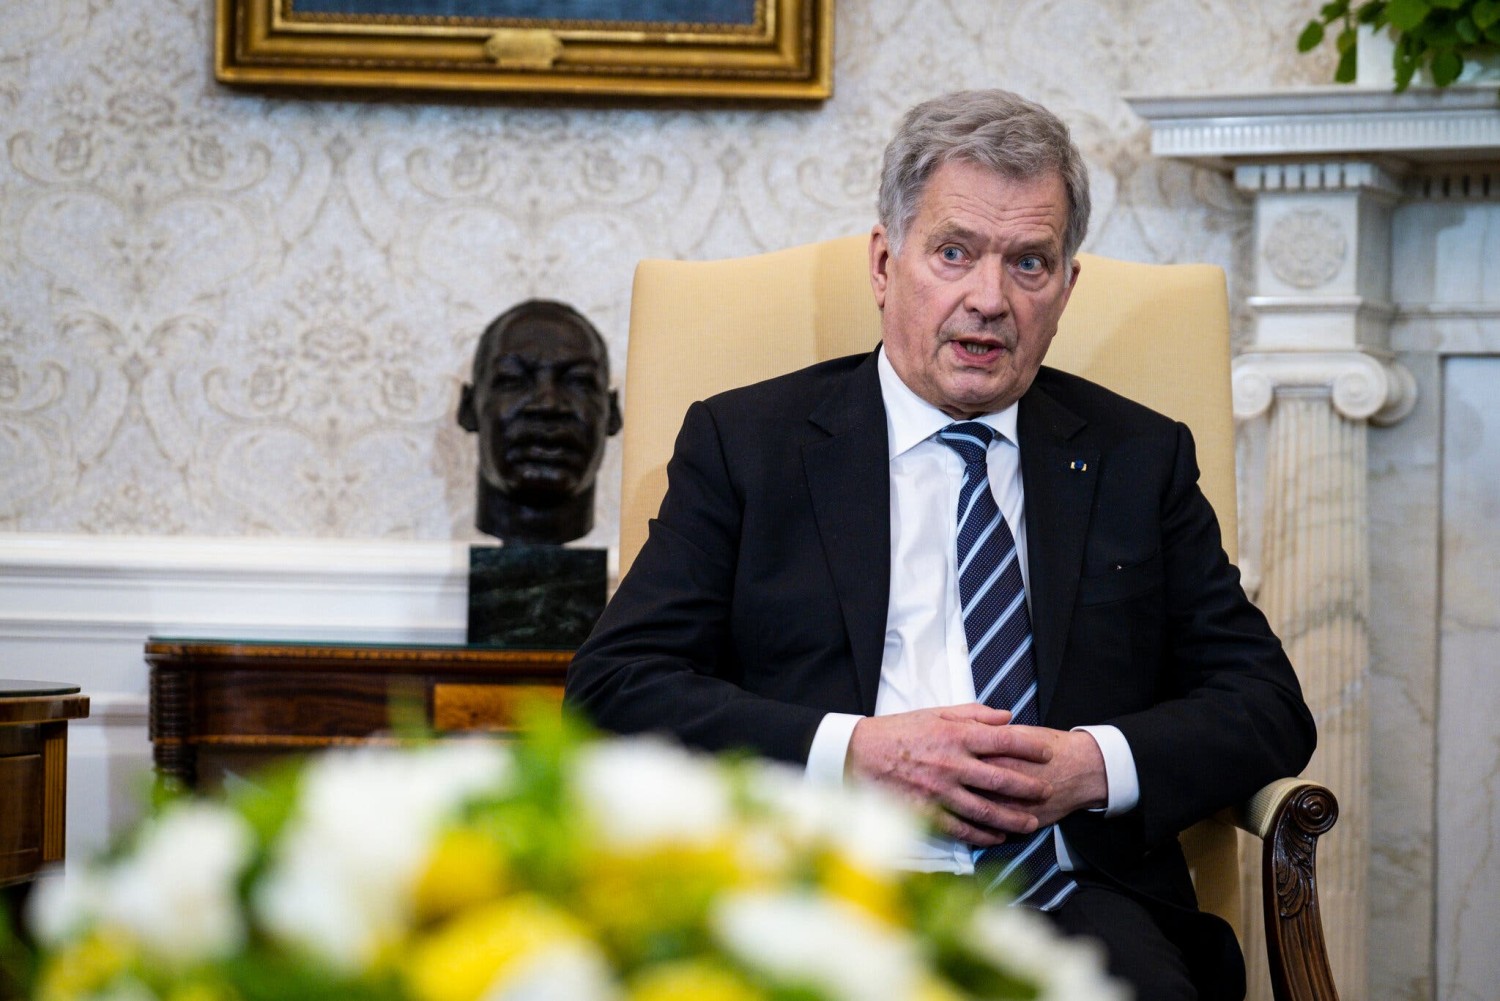 The president of Finland, Sauli Niinisto, at the White House in 2022.Credit...Pete Marovich for The New York Times